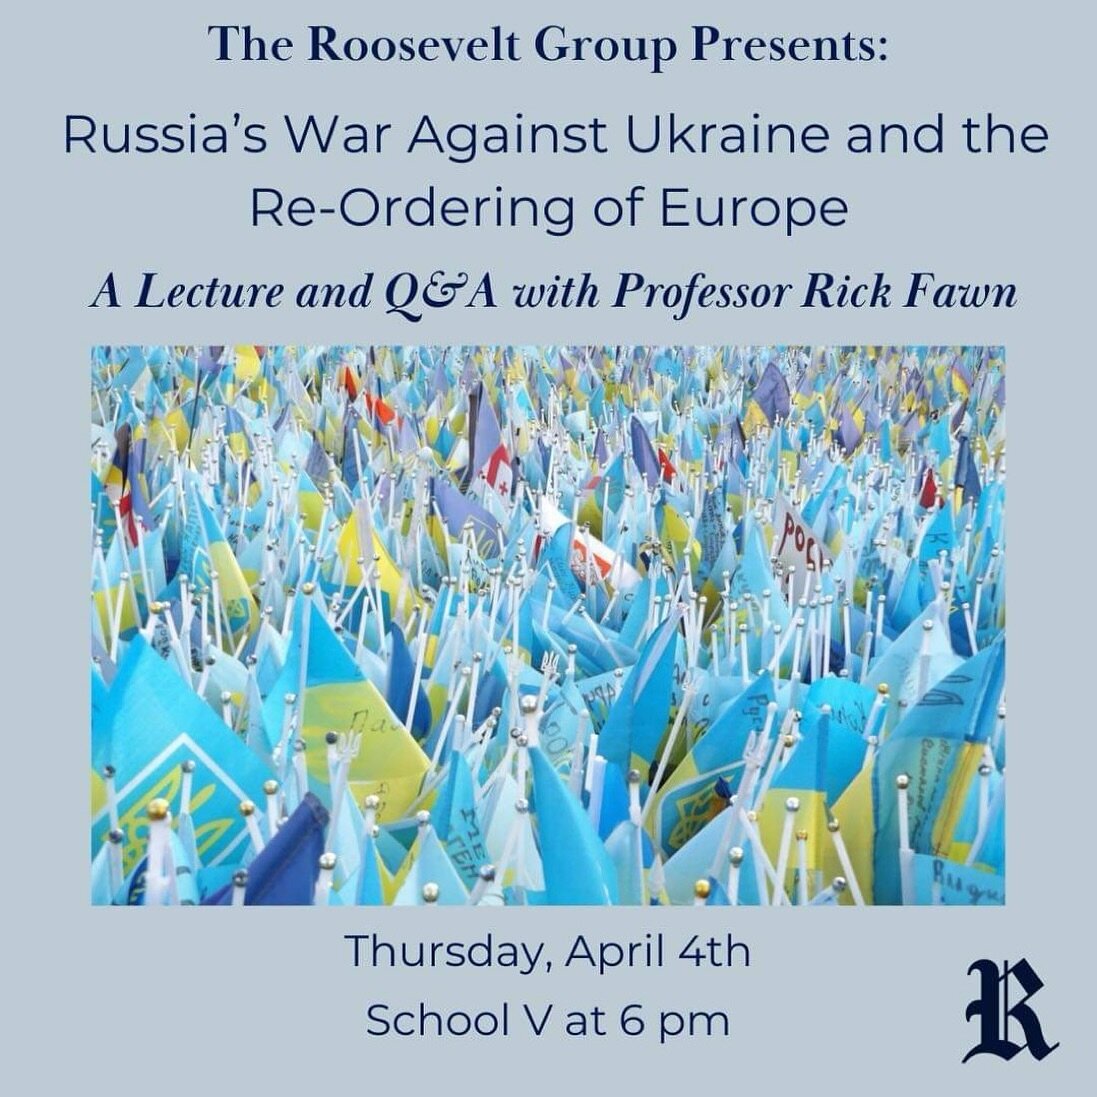 The Roosevelt Group is proud to announce a lecture with Professor Rick Fawn on Russia&rsquo;s War Against Ukraine and the Re-Ordering of Europe.

Rick Fawn is Professor in the School of International Relations. Alongside academic work, he has engaged